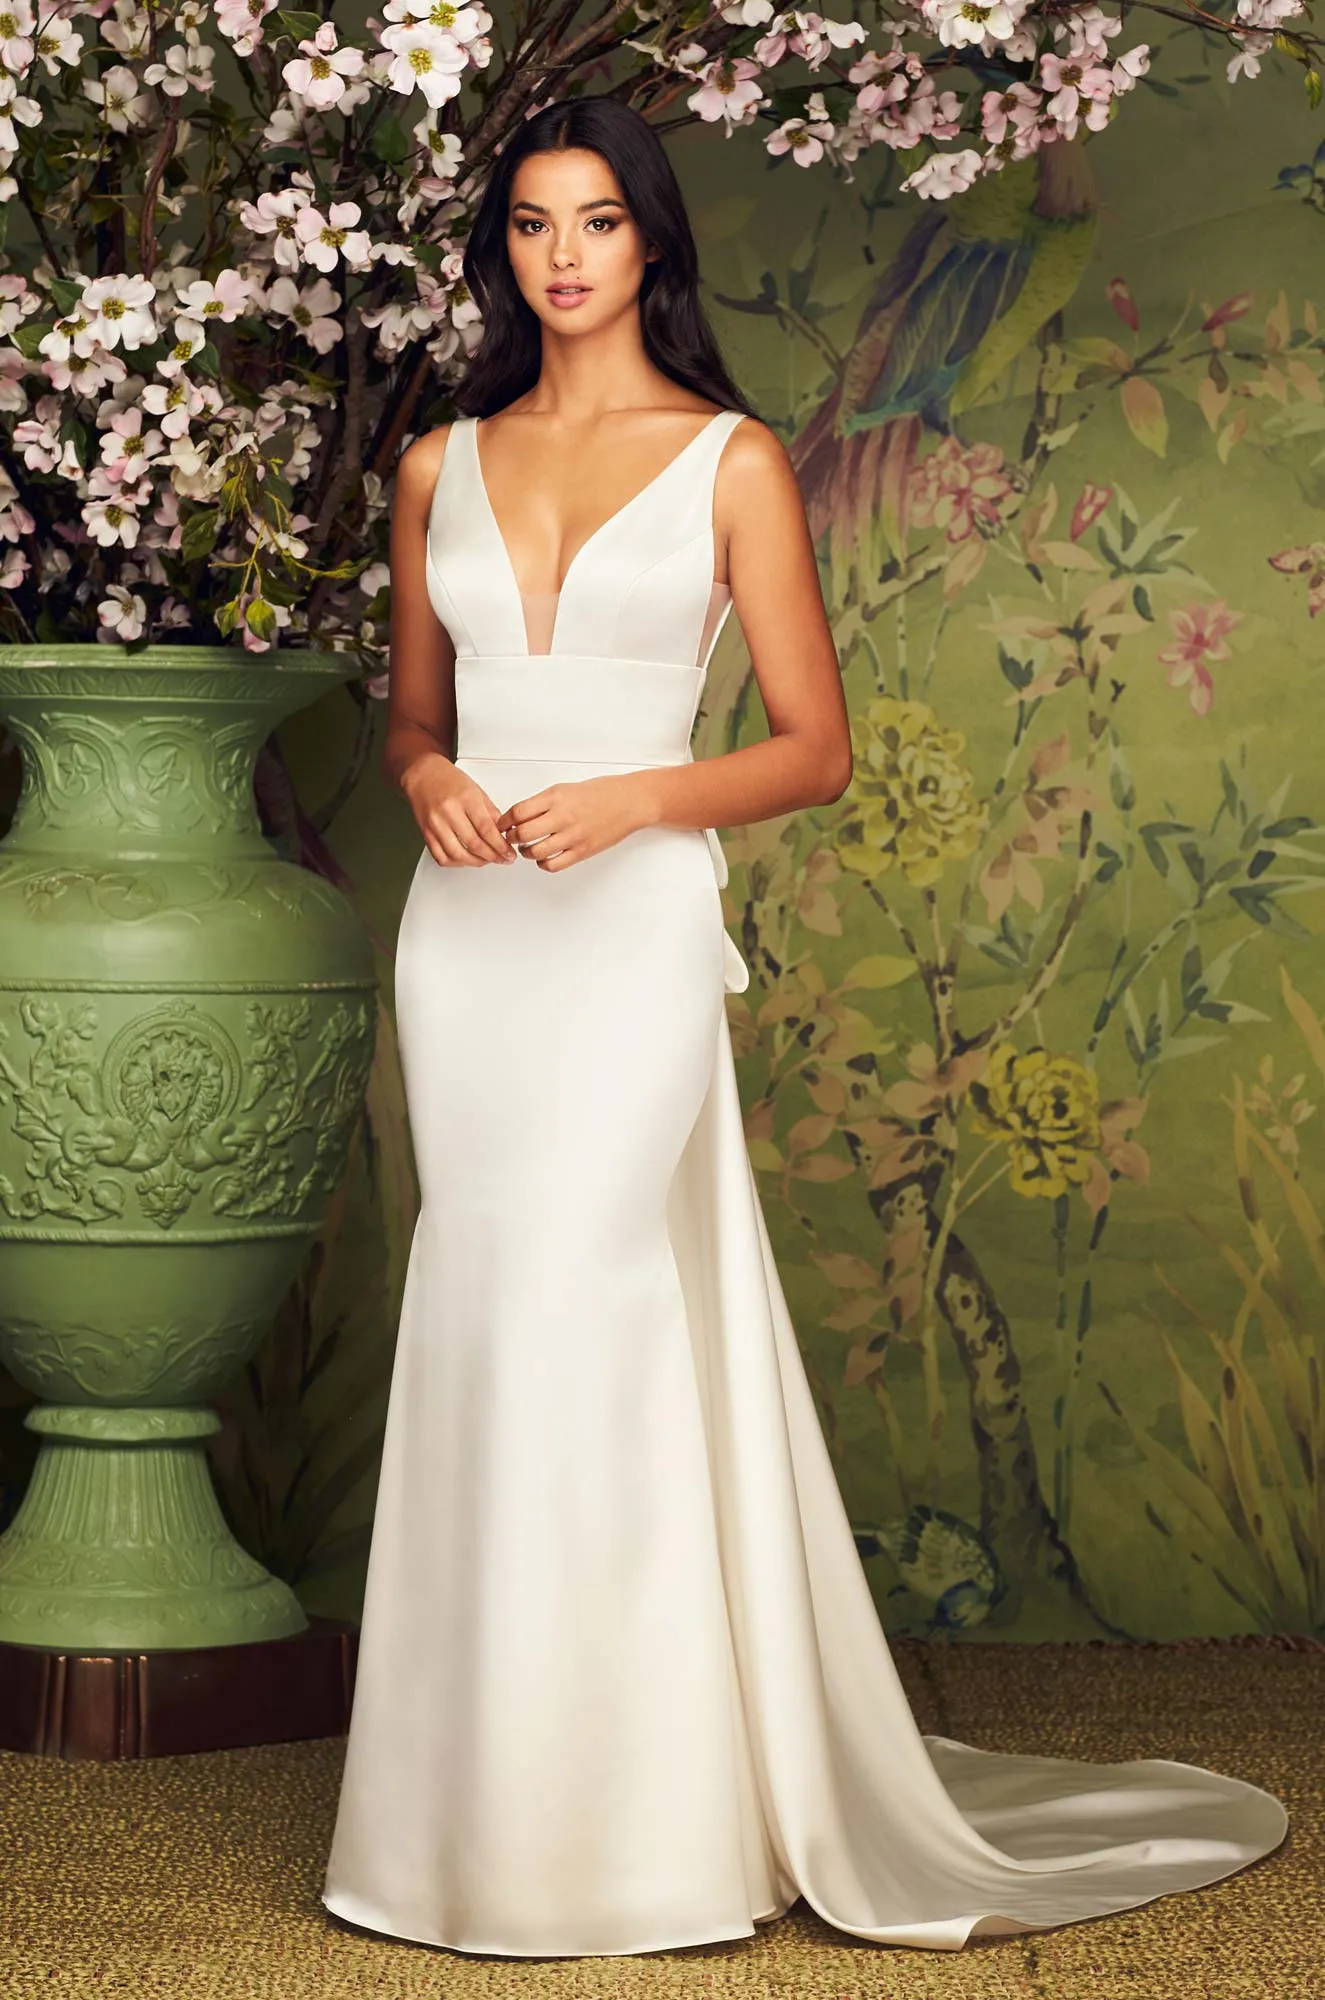 A Luxurious Satin Wedding Dress with Plunging Neck and low back. Detachable Bow and Train. A Bridal Gown with 2 looks